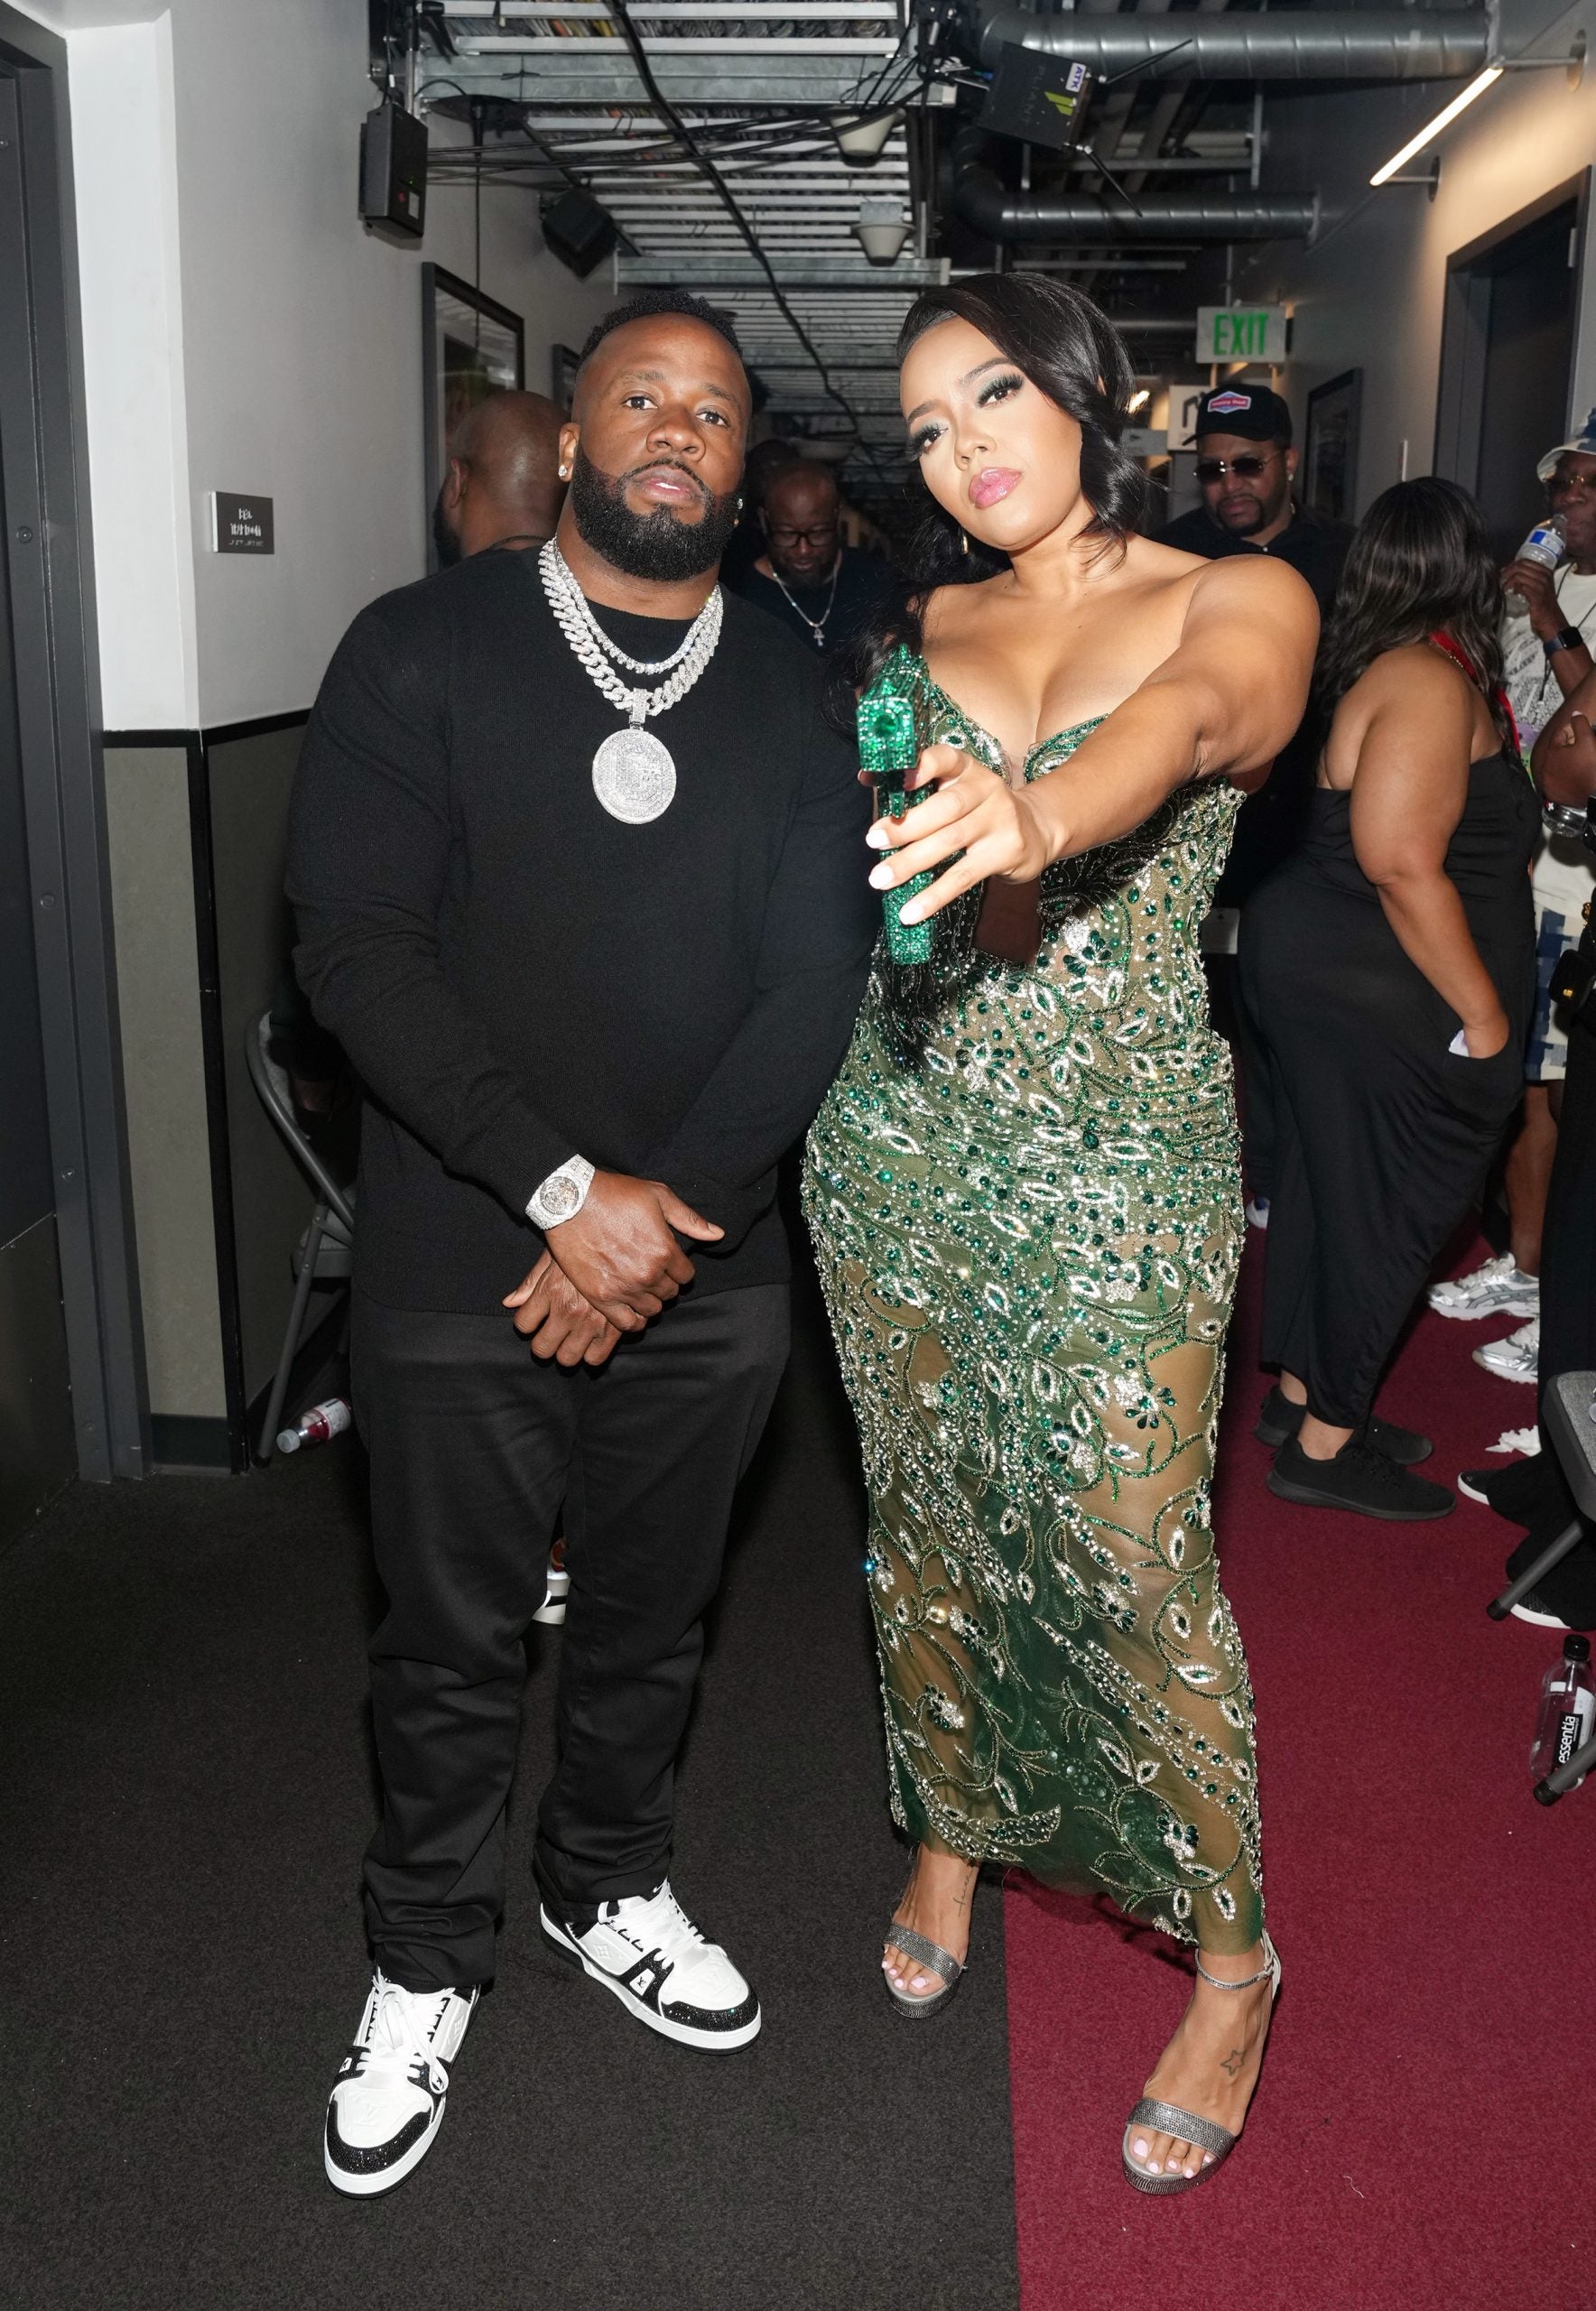 Yo Gotti Defends Girlfriend Angela Simmons And Her Controversial BET Awards Purse Shaped Like A Gun